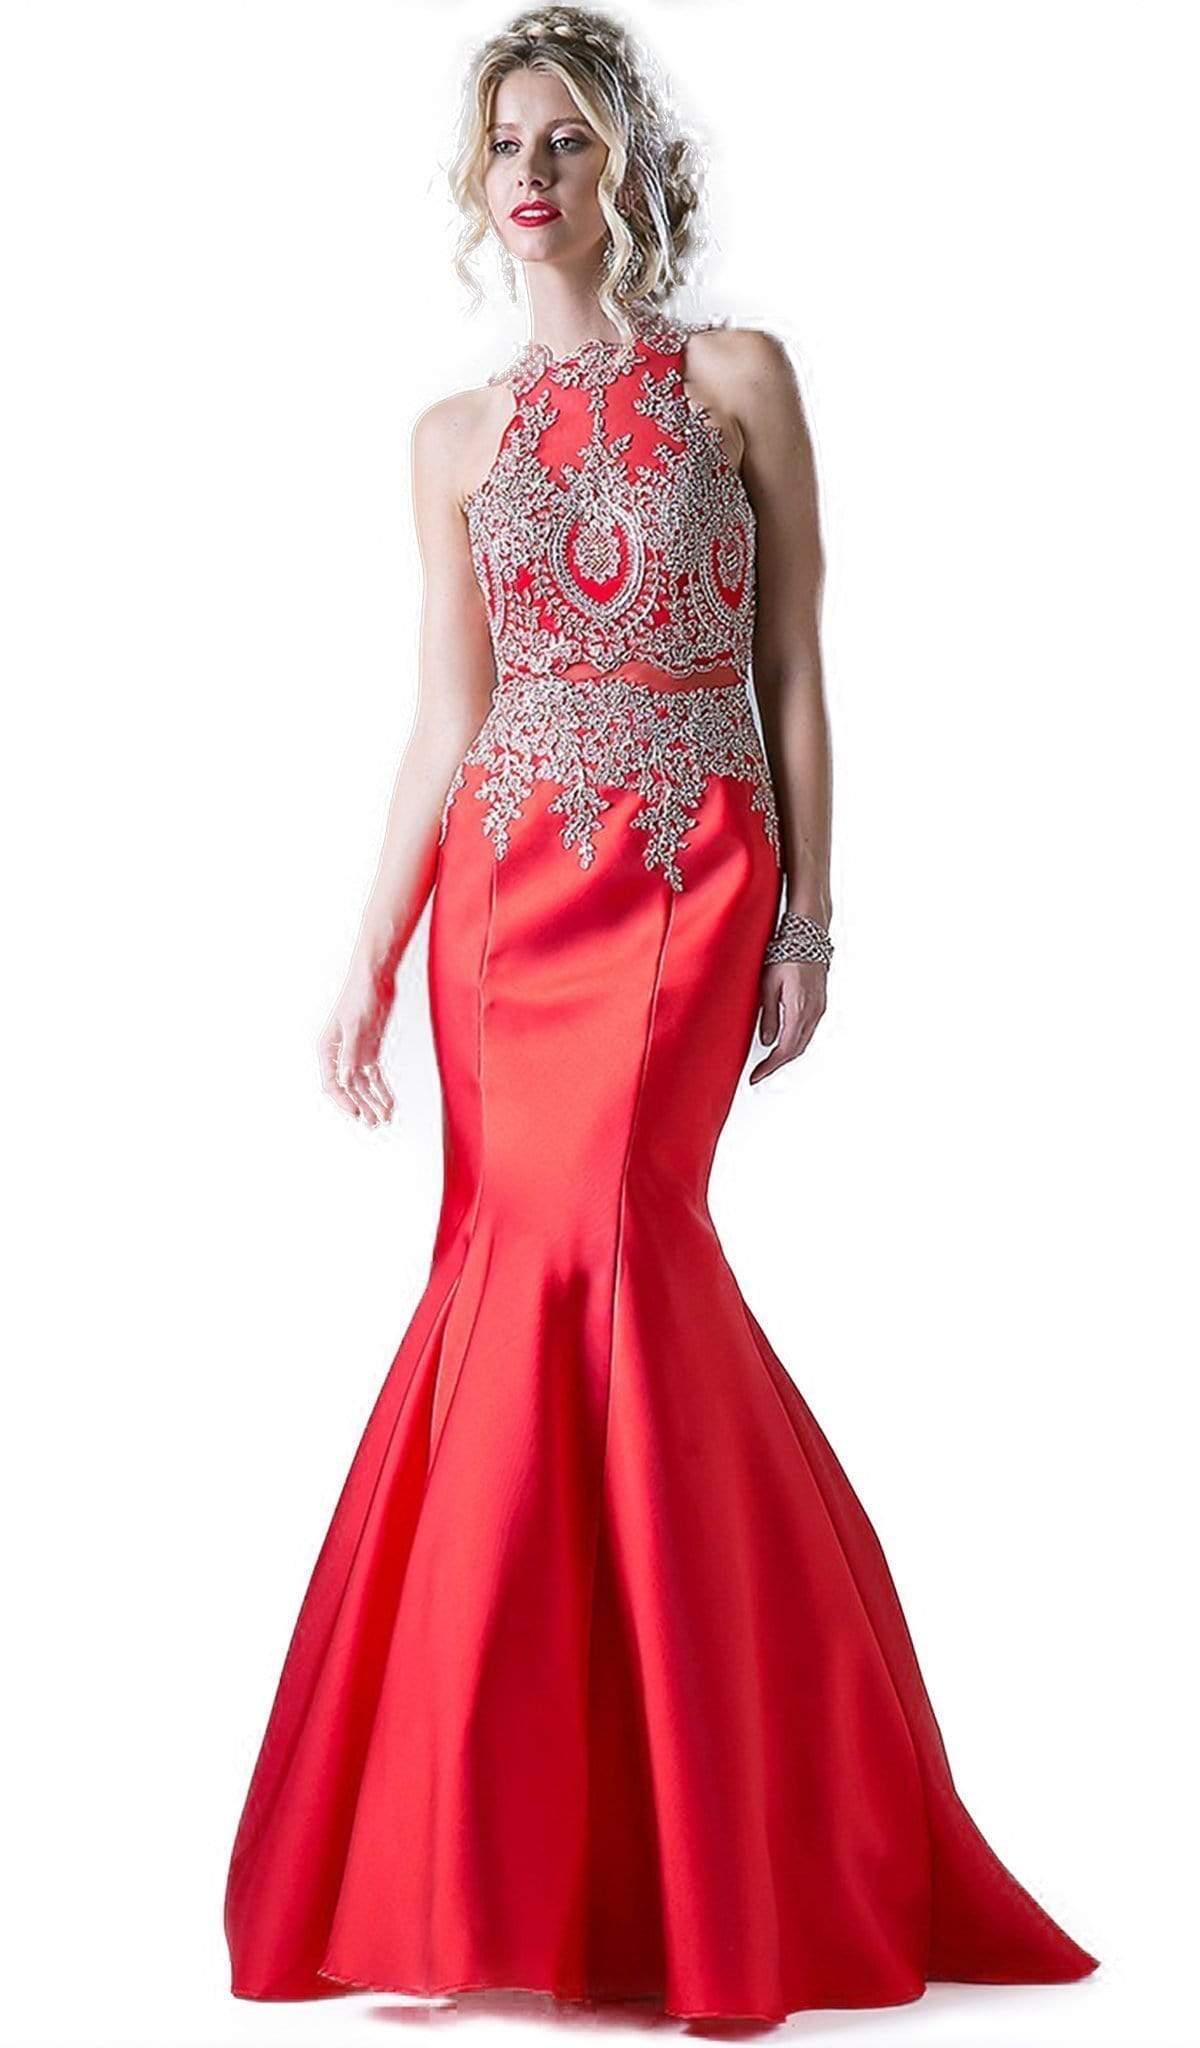 Cinderella Divine - Metallic Lace Adorned High Neck Mermaid Evening Gown Special Occasion Dress 2 / Red